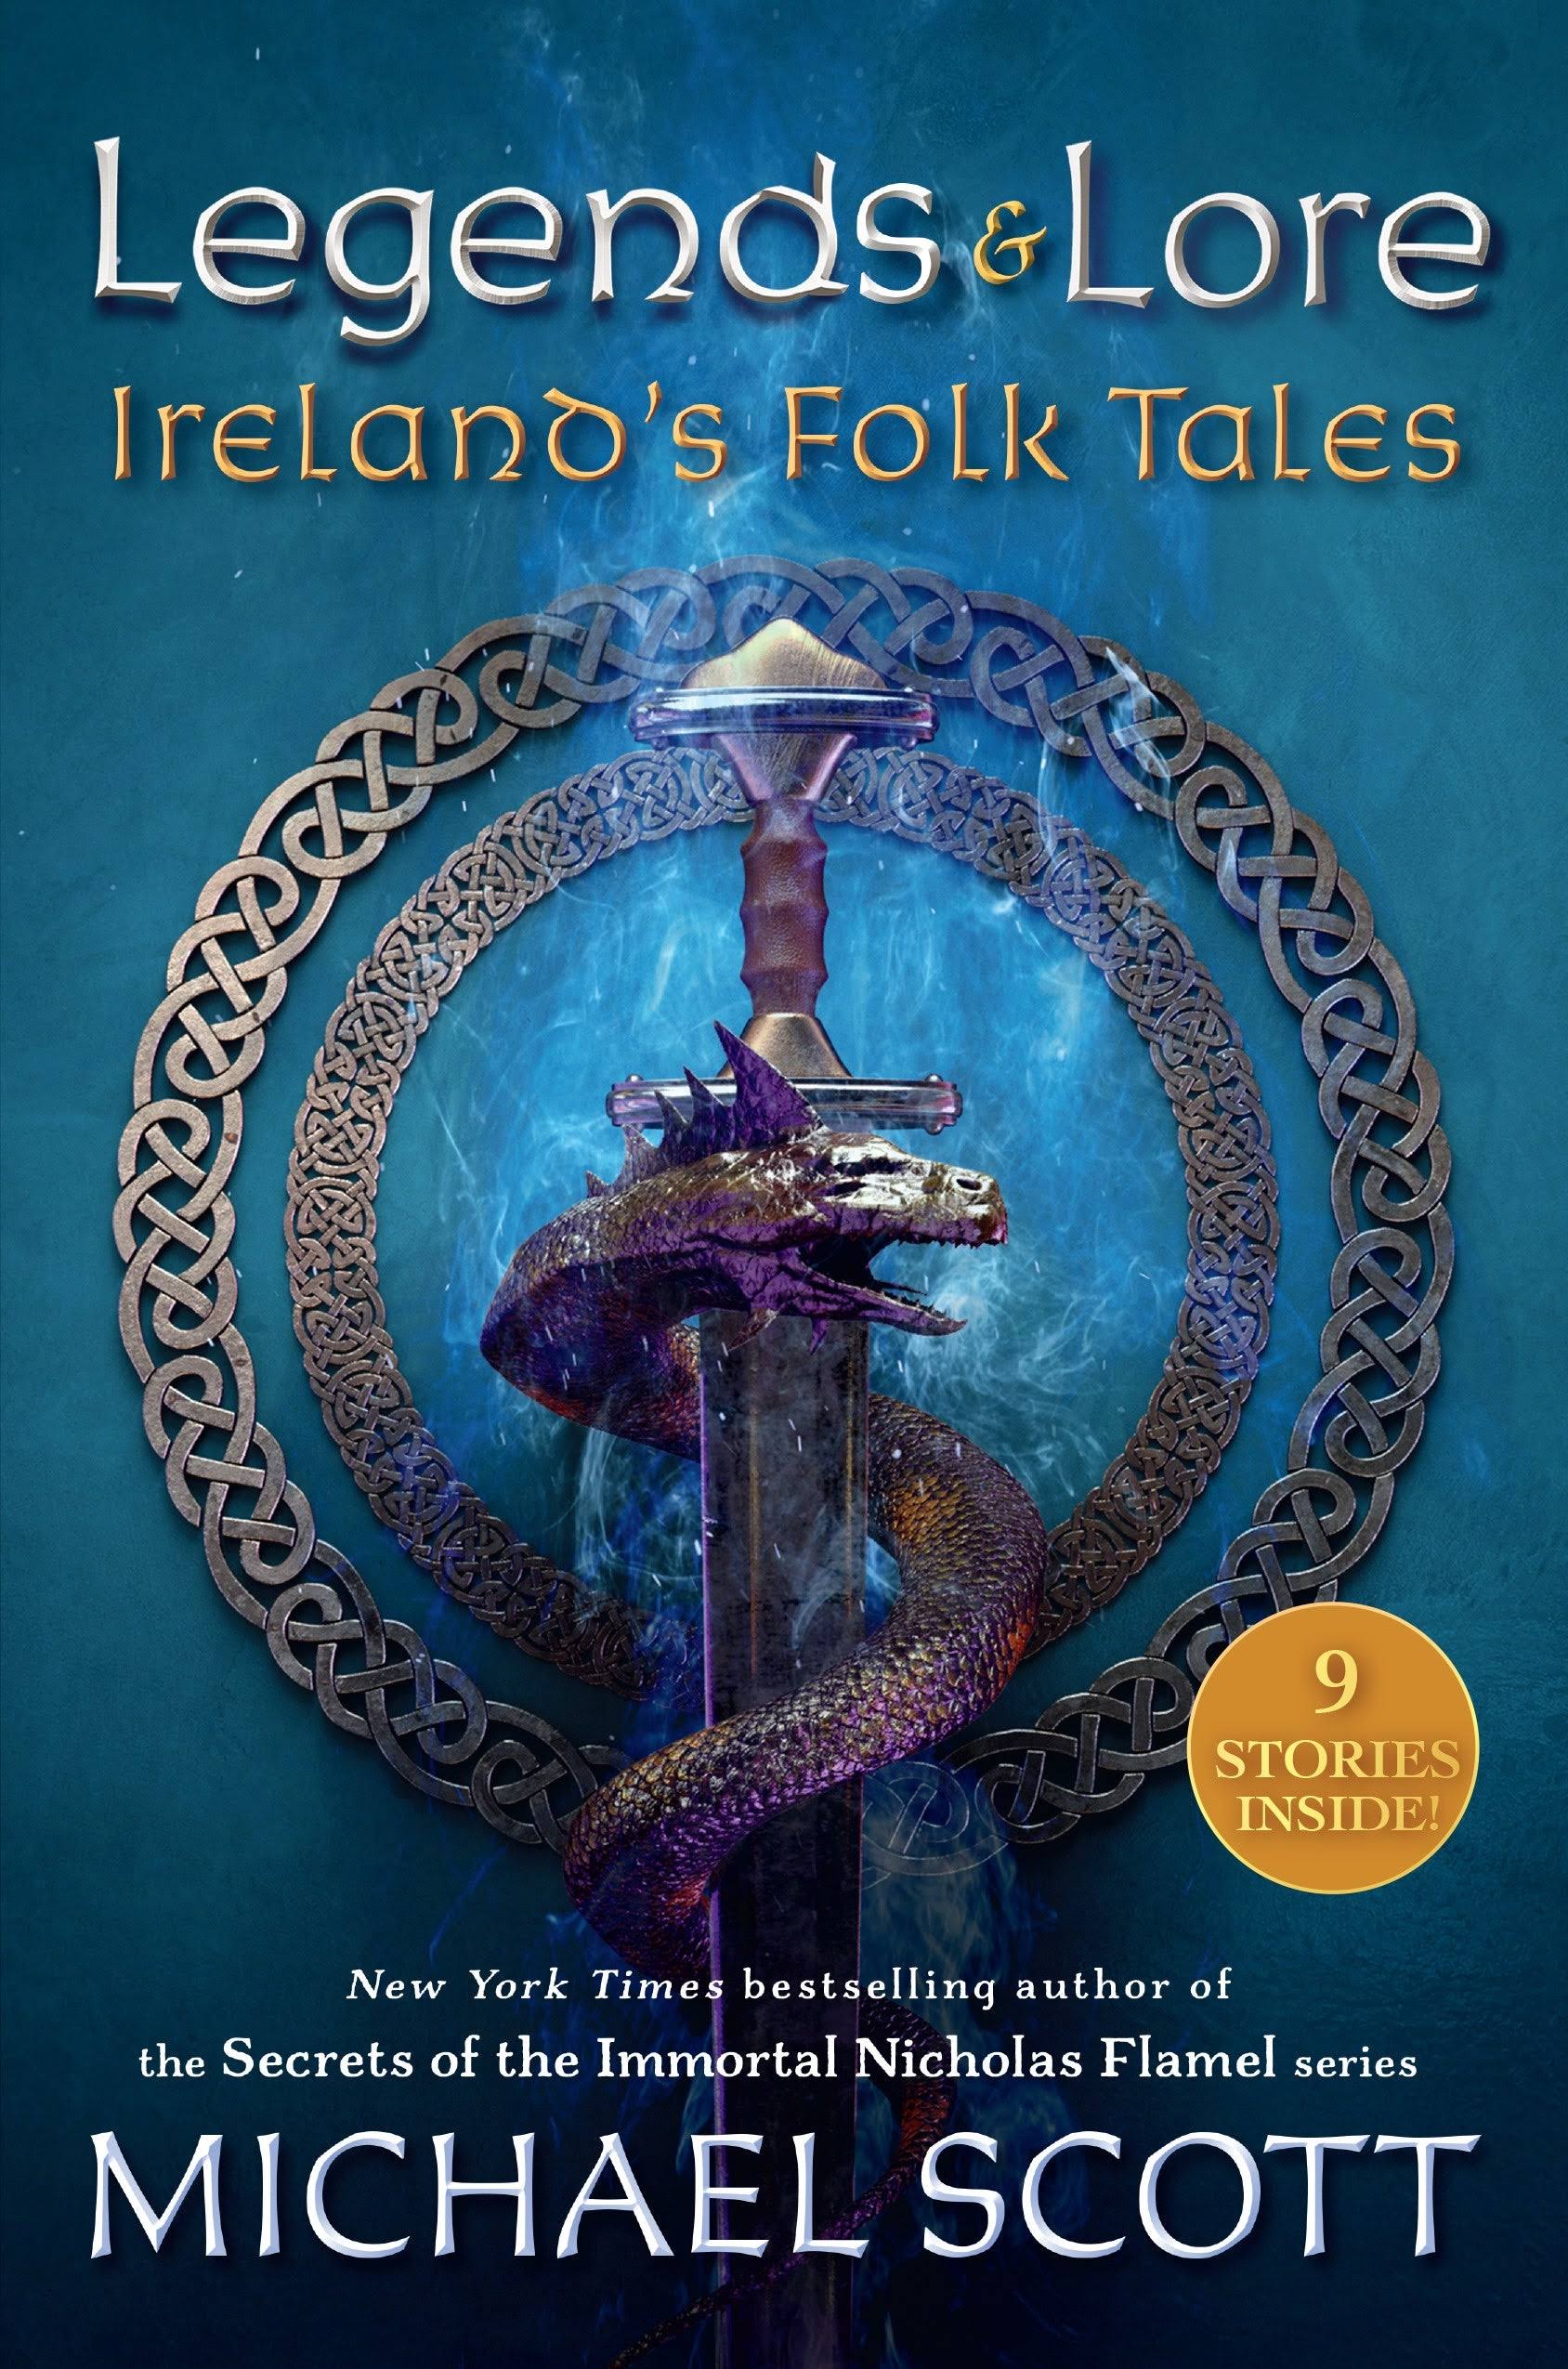 Legends and Lore: Ireland's Folk Tales [Book]